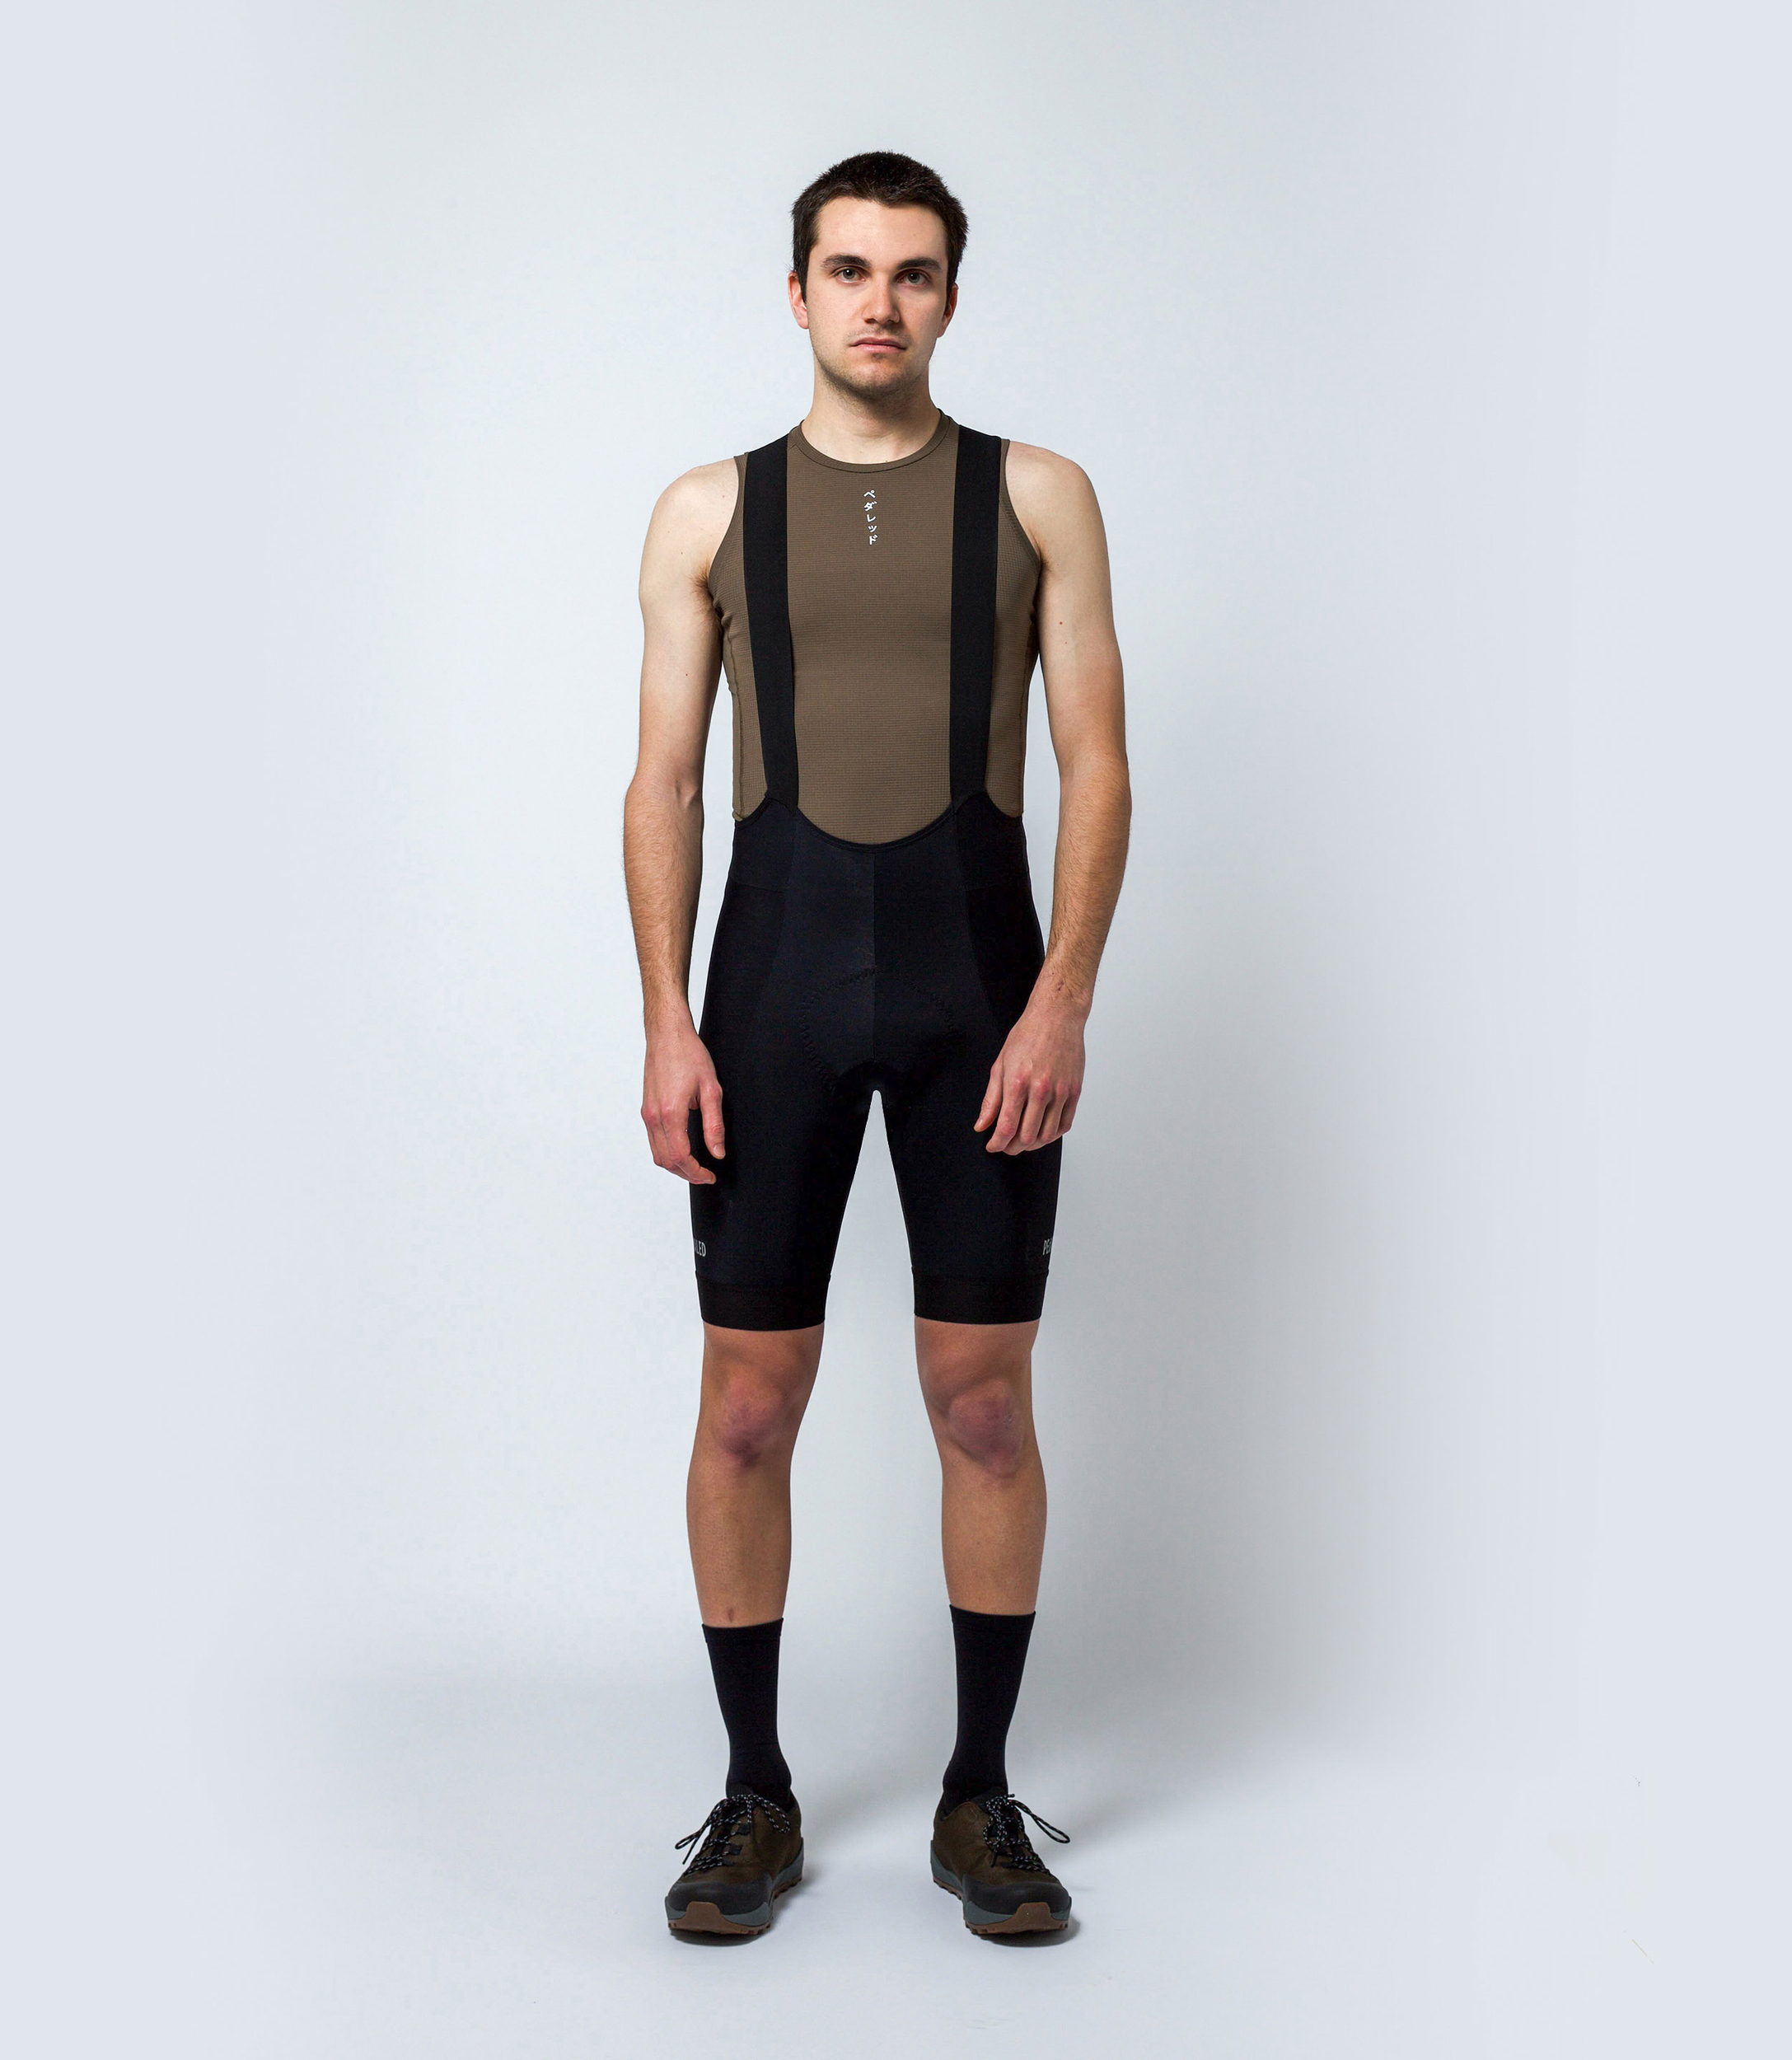 cycling-gravel-bibshorts-black-jary-total-body-front-pedaled_1